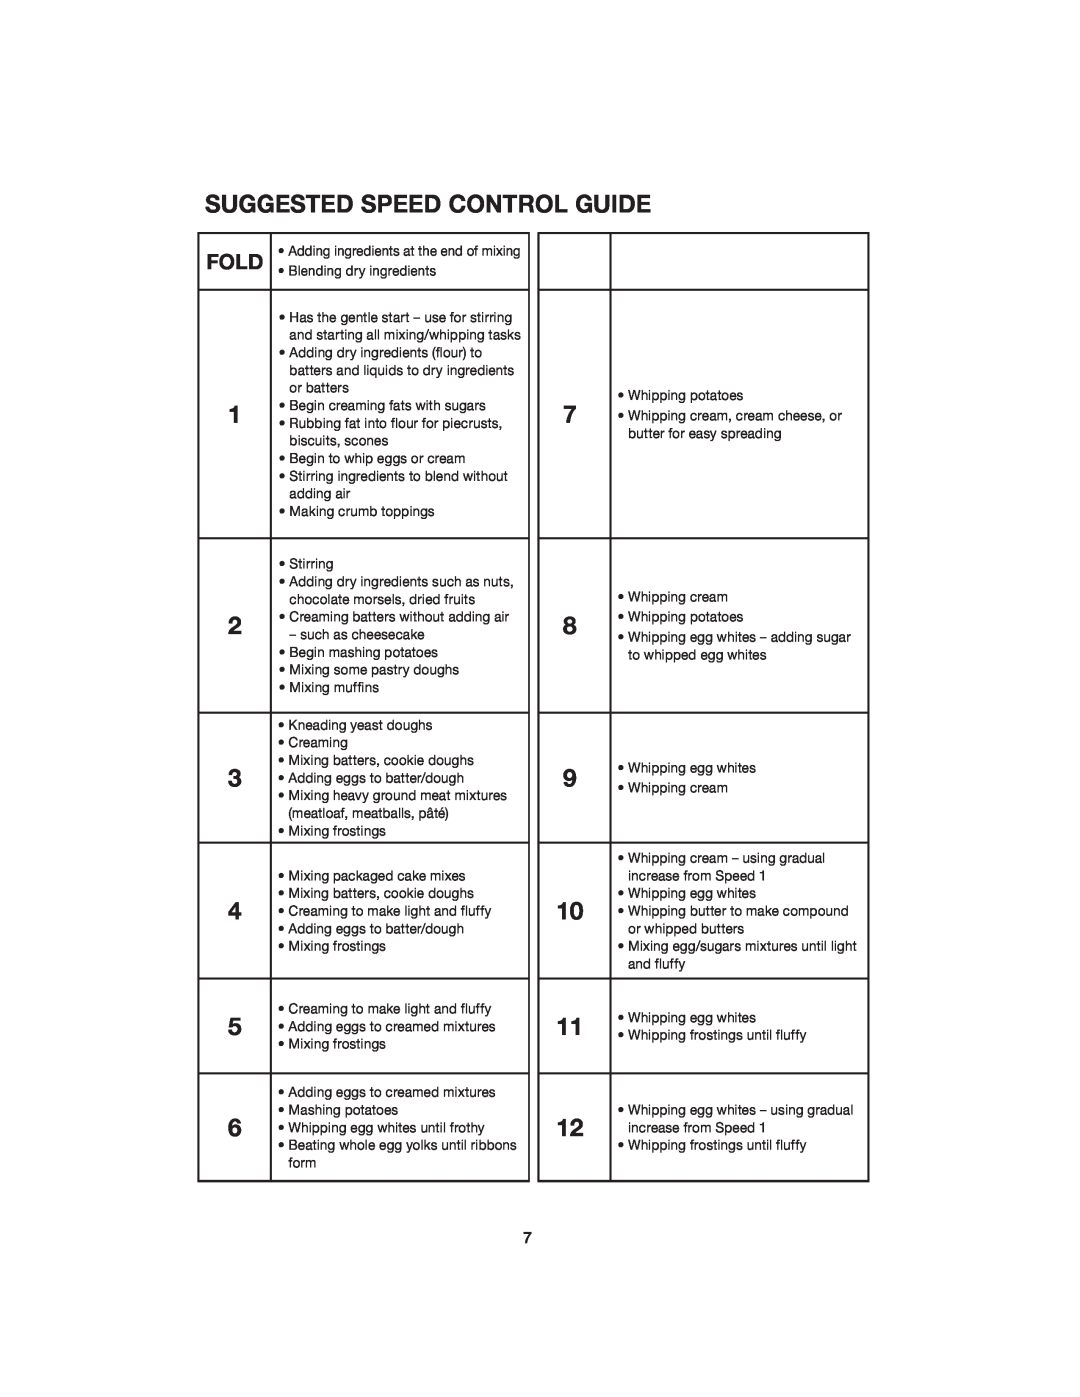 Cuisinart SM-55BK manual Suggested Speed Control Guide, Fold 